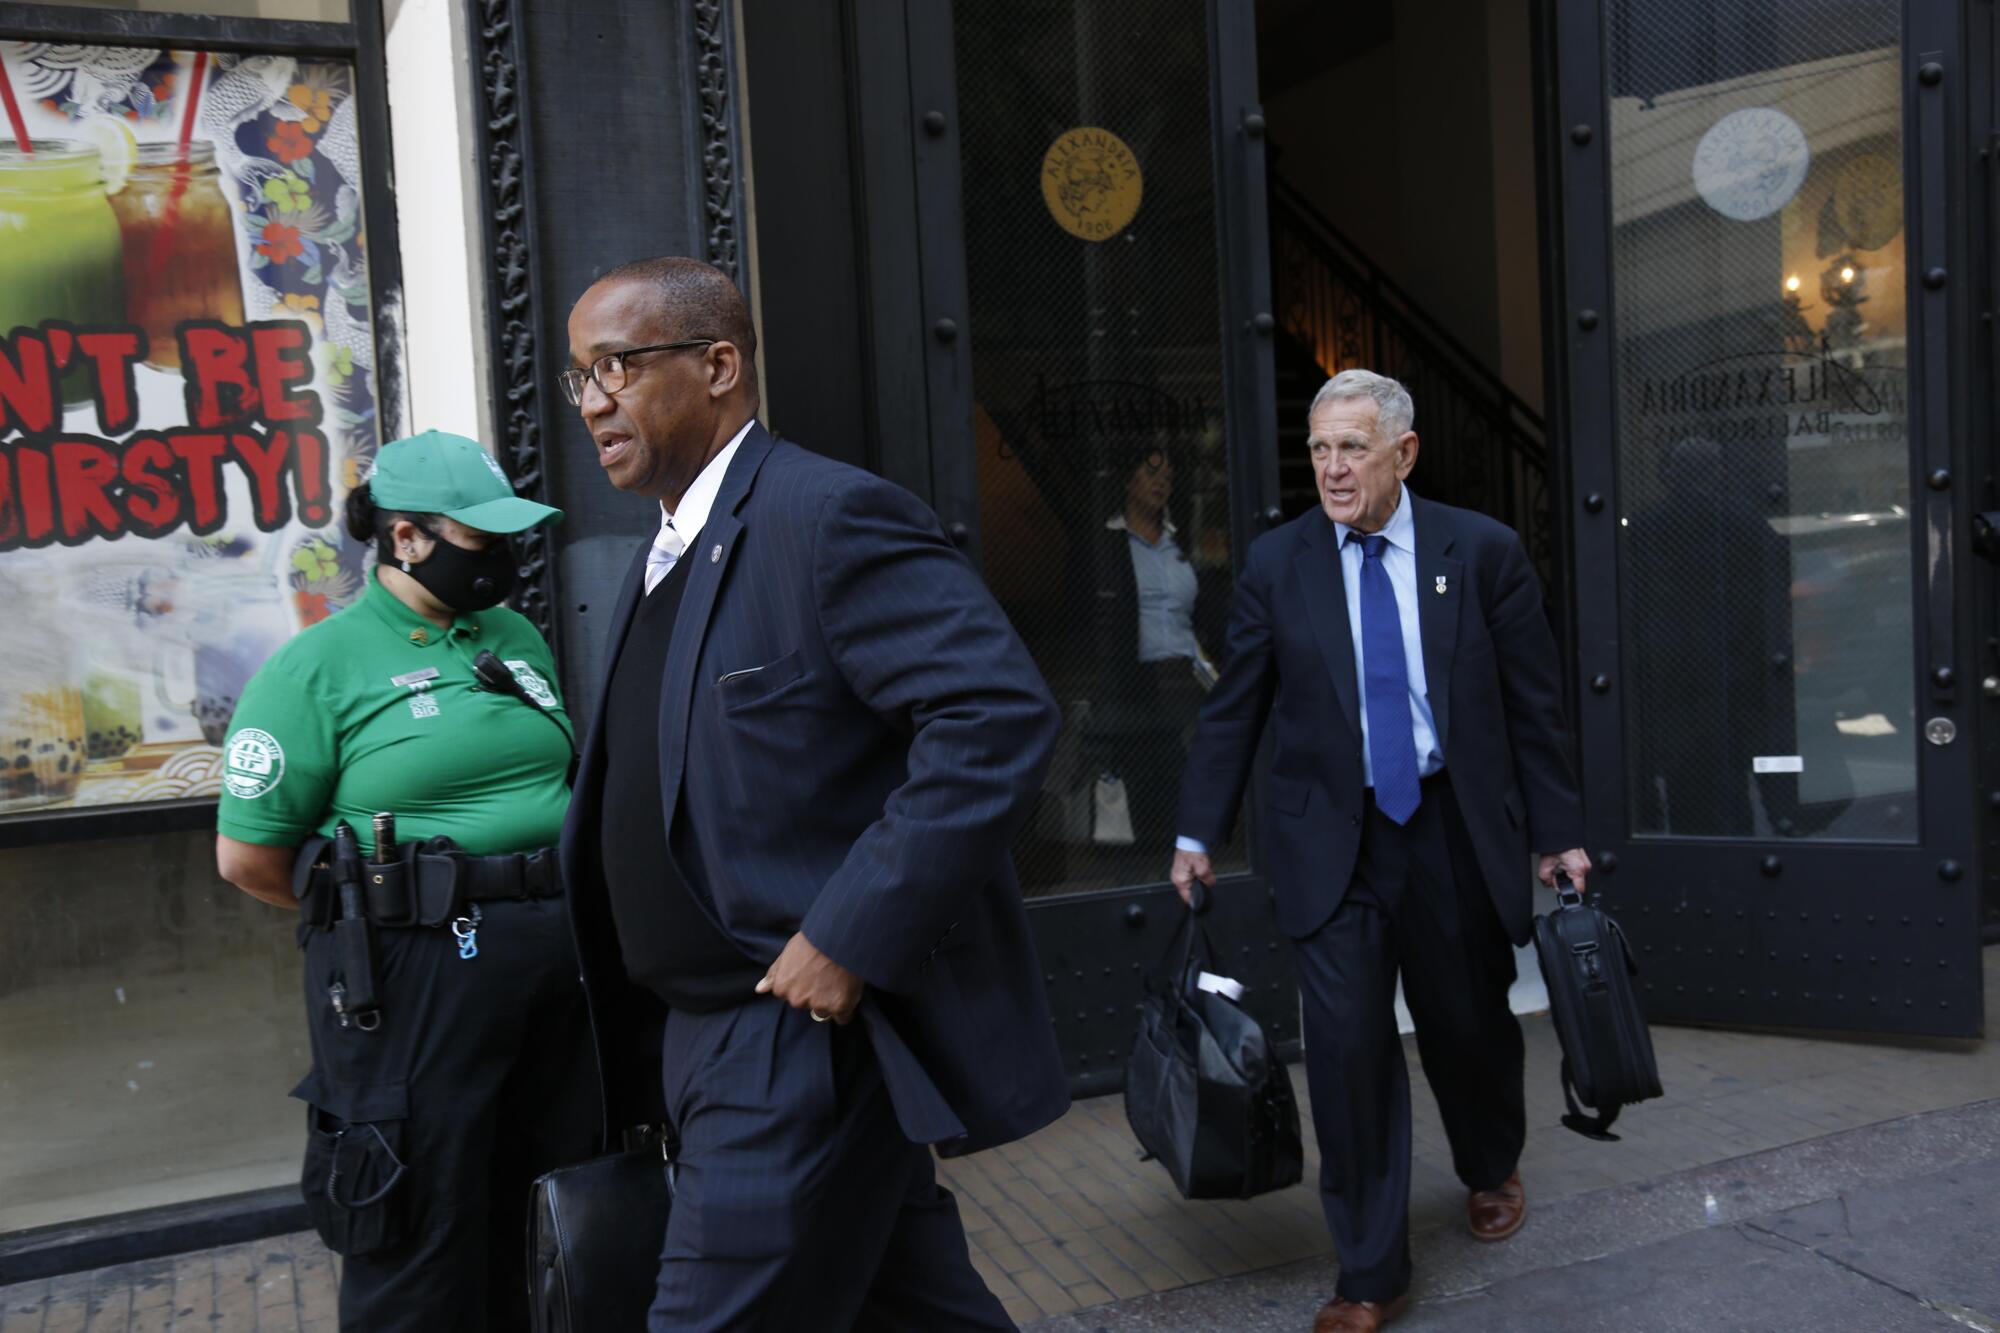 U.S. District Judge David Carter, right, and U.S. District Judge Andre Birotte, Jr., leave a closed Federal court hearing to discuss possible immediate solutions to the Skid Row homeless crisis in light of the worsening coronavirus pandemic at the Alexandria Hotel in downtown Los Angeles.